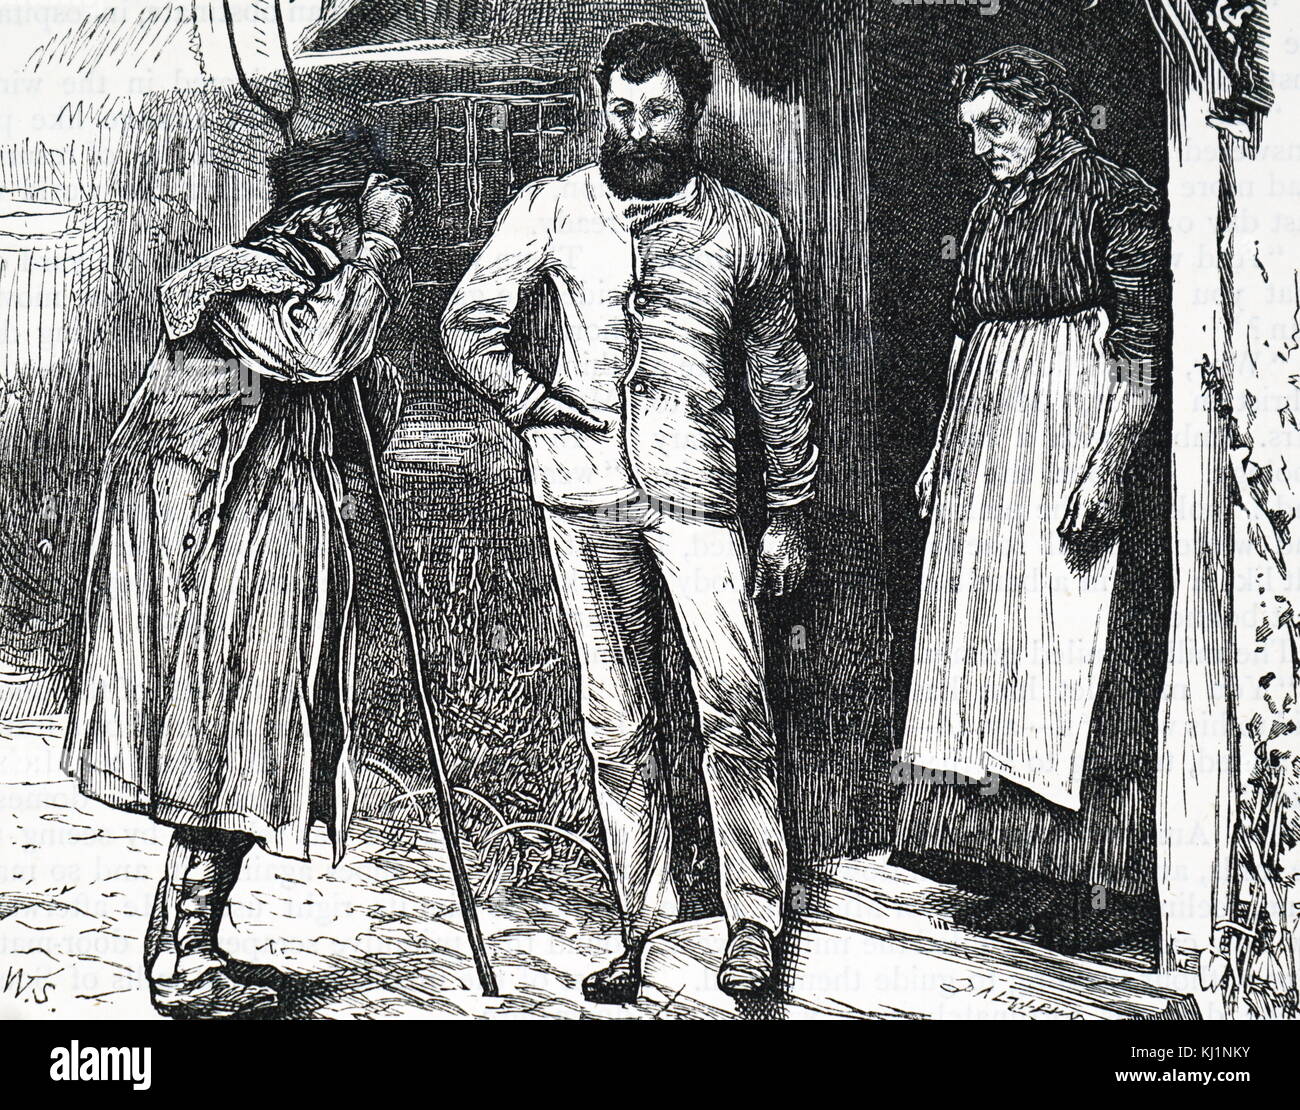 Engraving depicting a farm labourer carrying a pitchfork whilst speaking to some of the townsfolk. Dated 19th Century Stock Photo